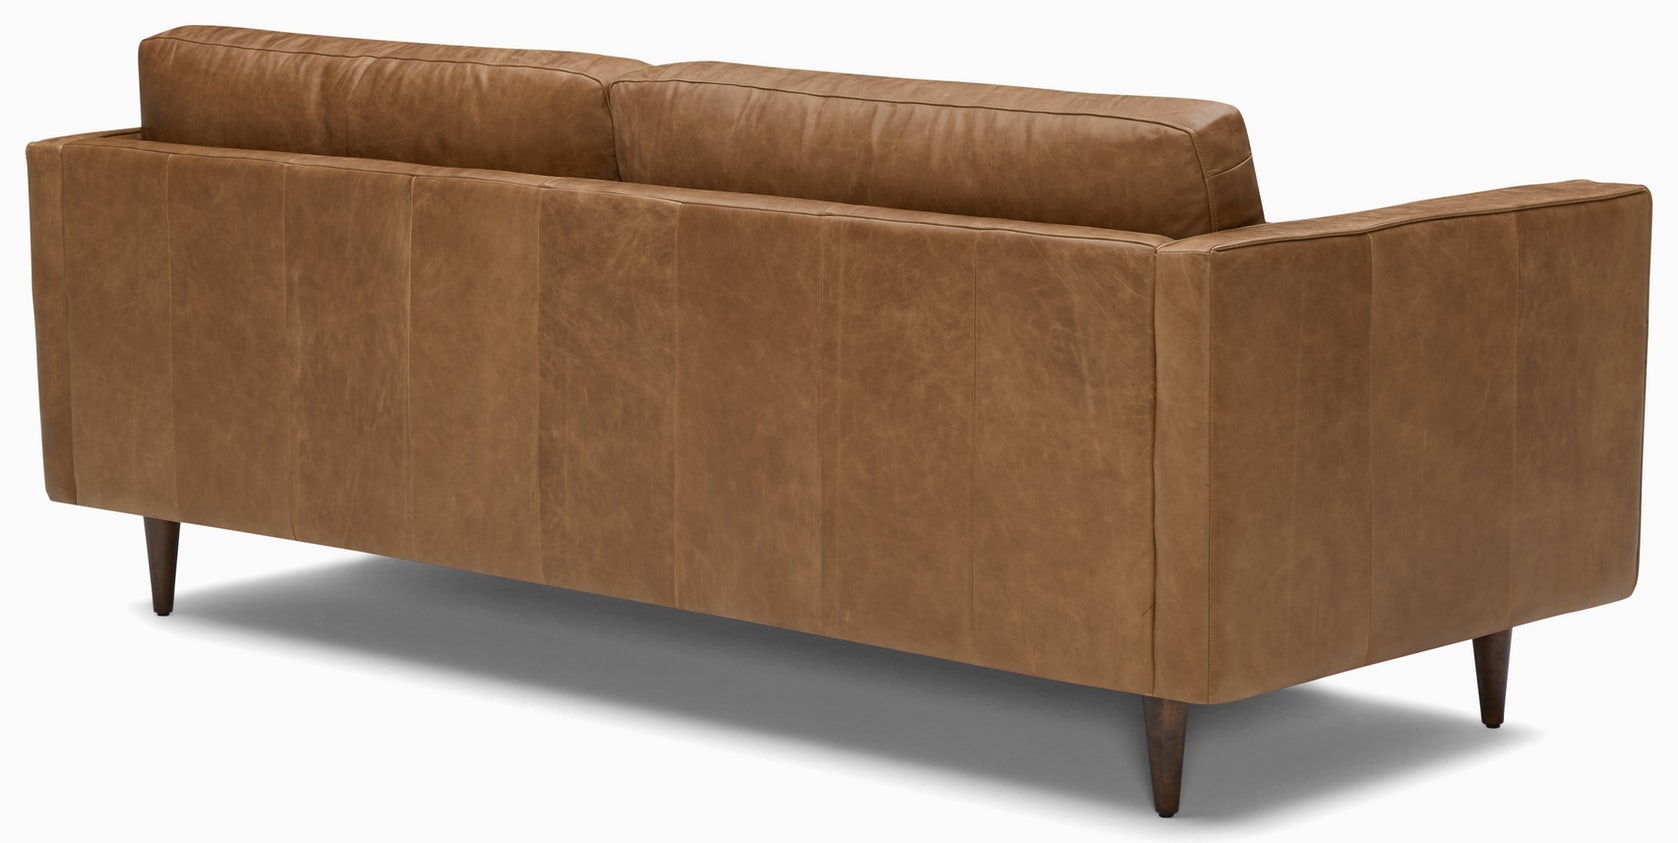 Briar Leather Sofa in Santiago Ale with Mocha wood stain - Image 3